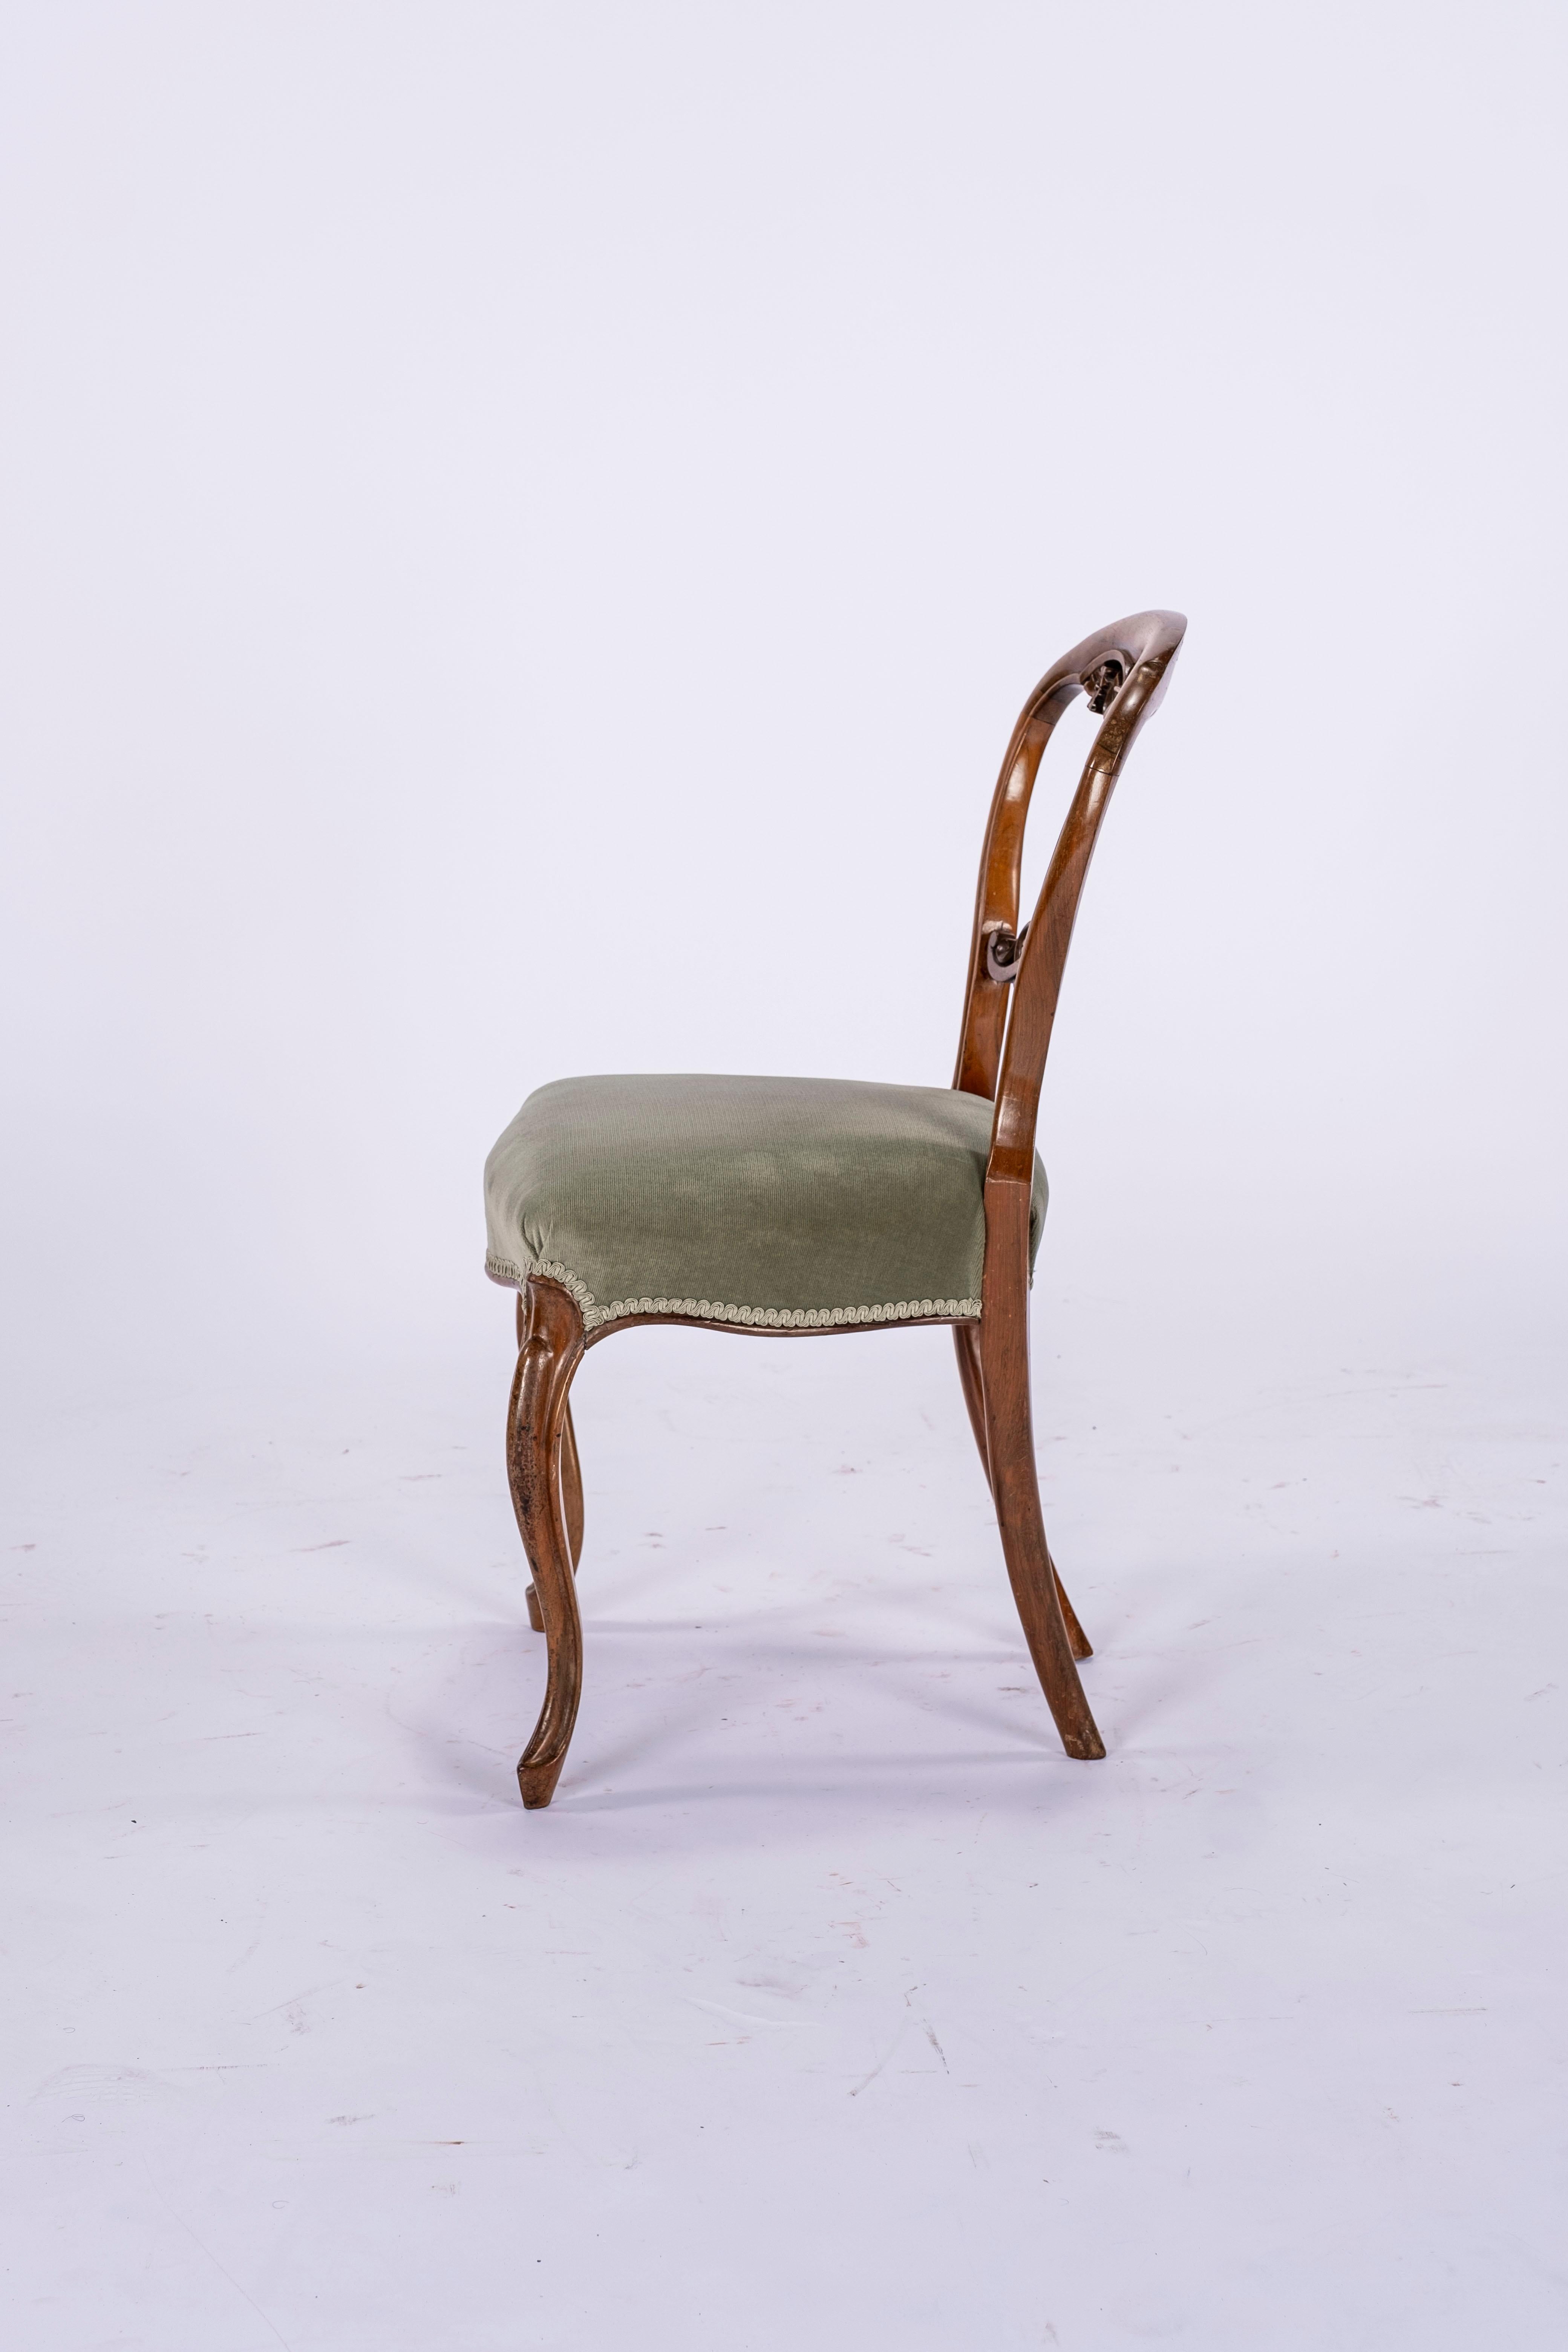 Single Art Deco French chair in fruitwood.